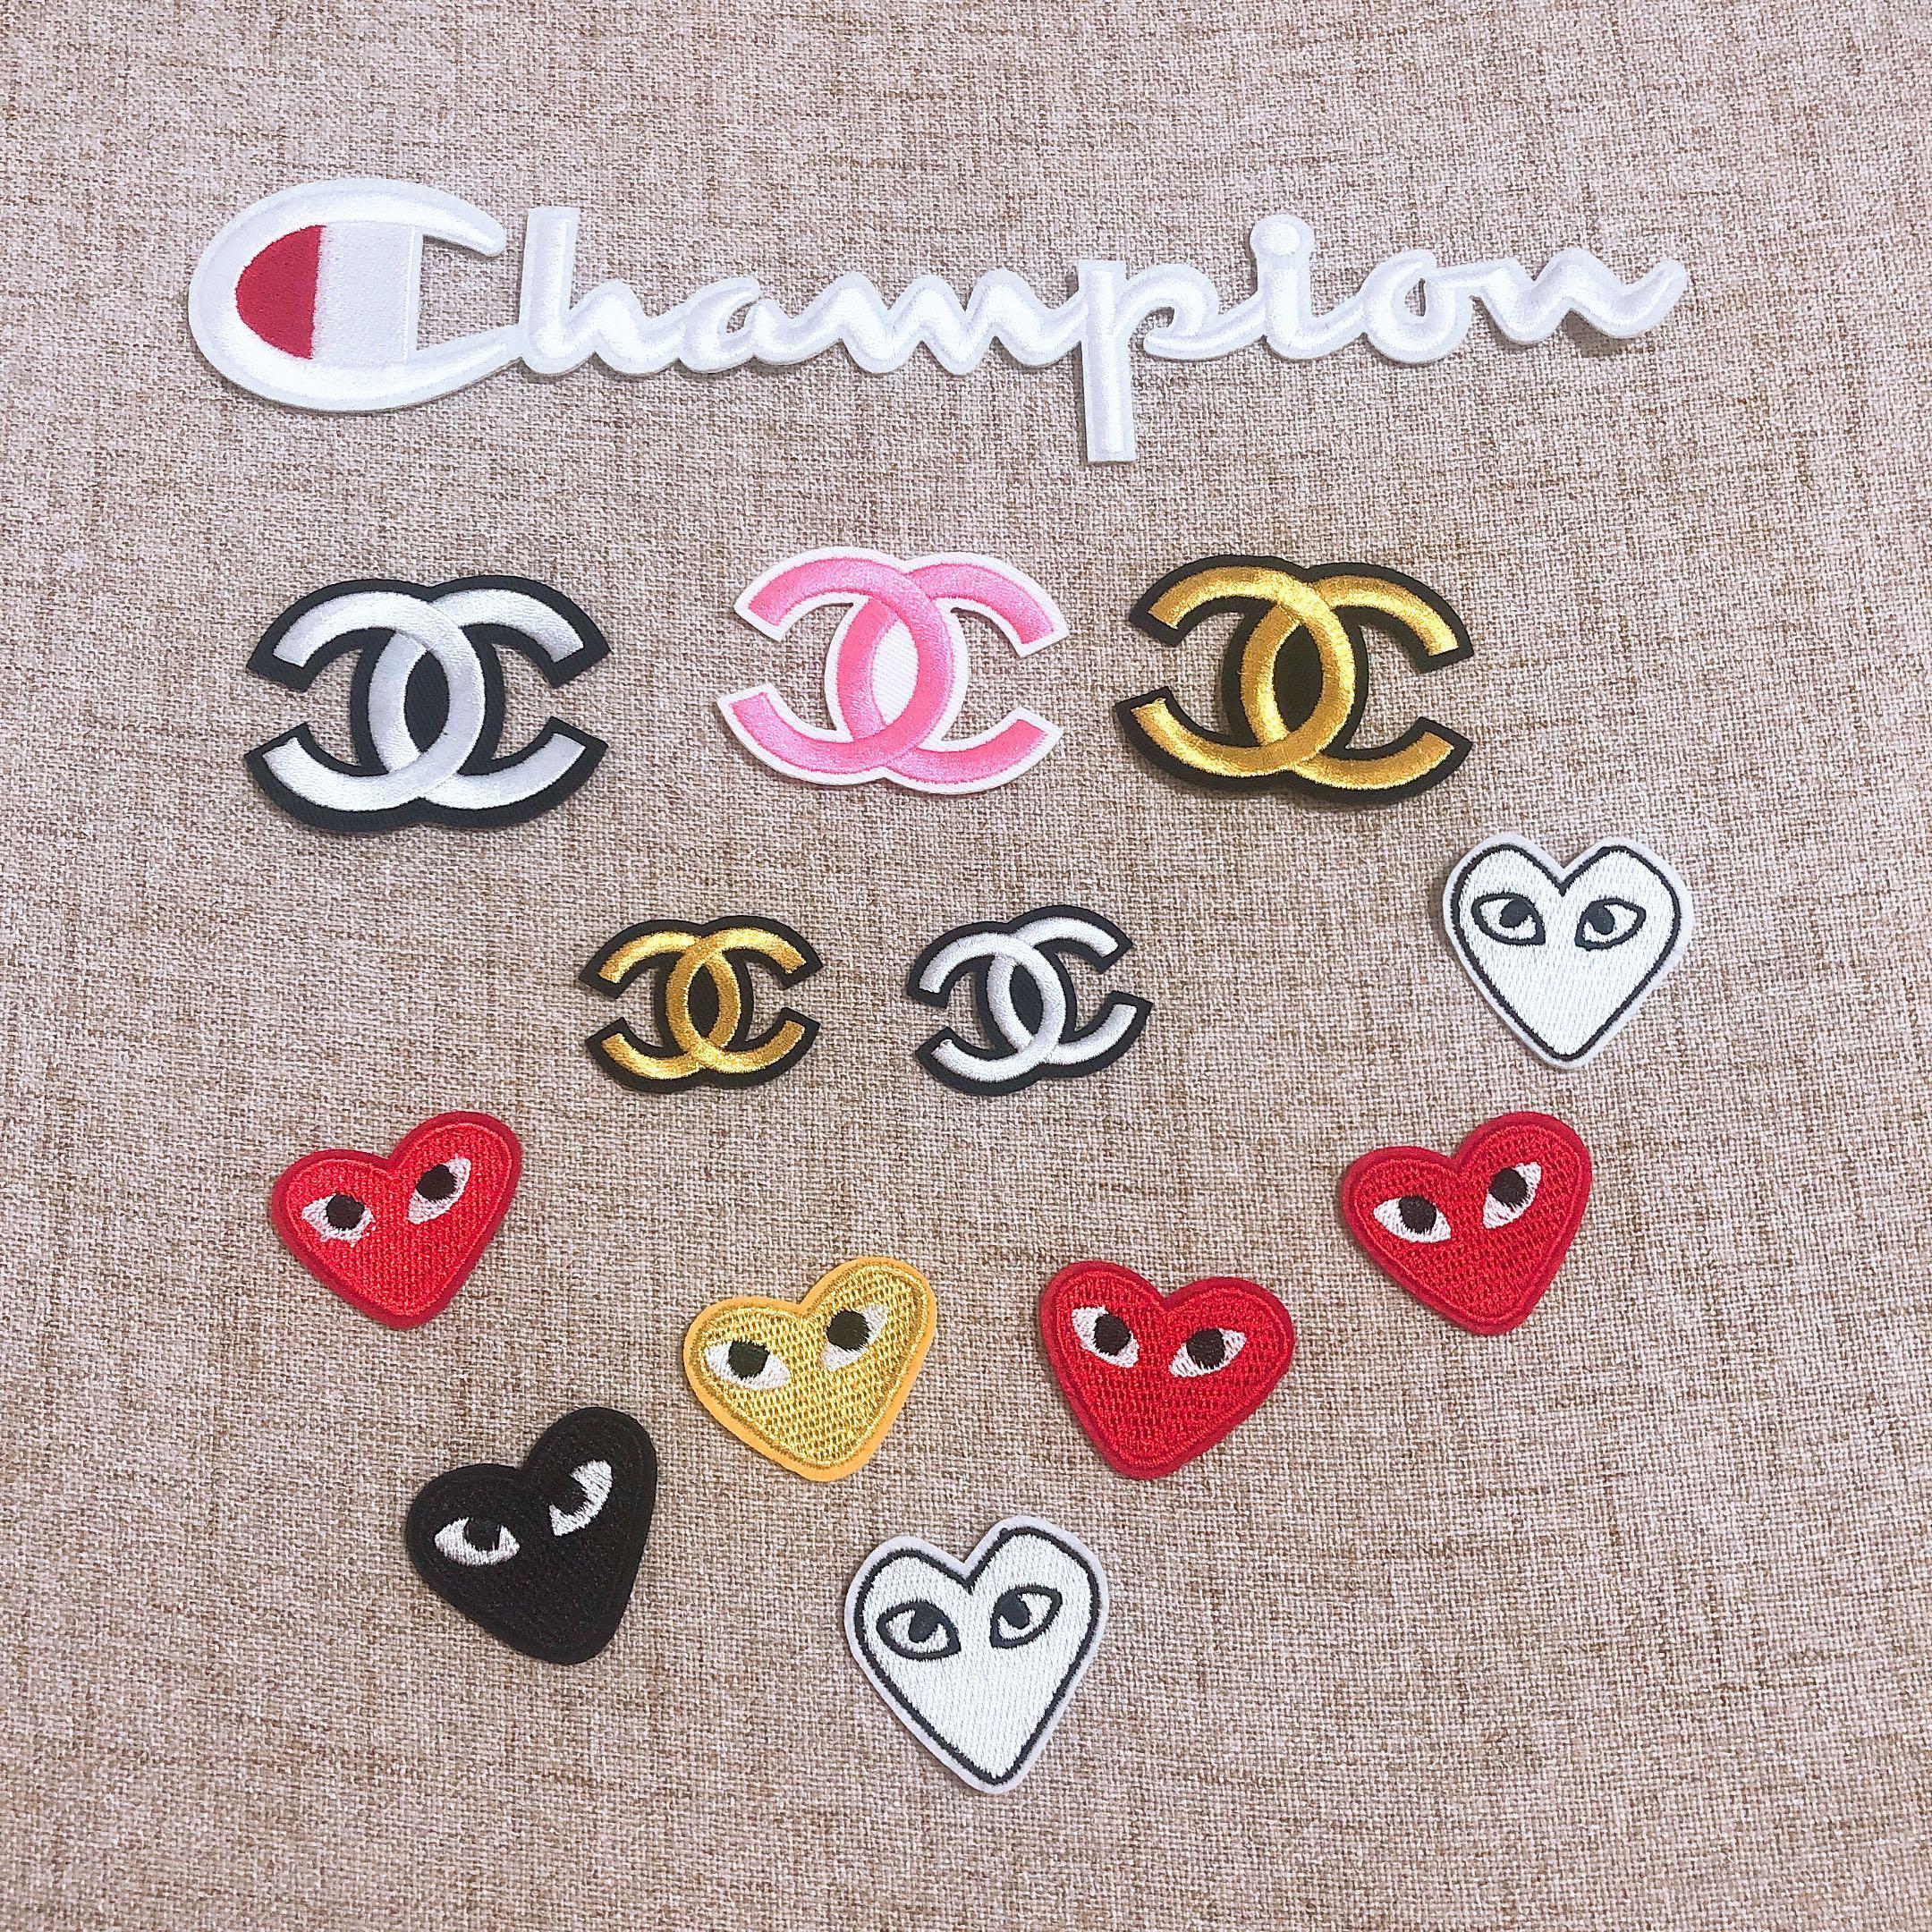 Chanel Patch,SYL Patch,Diro Patch,Patch For Clothing,Glitter Patches